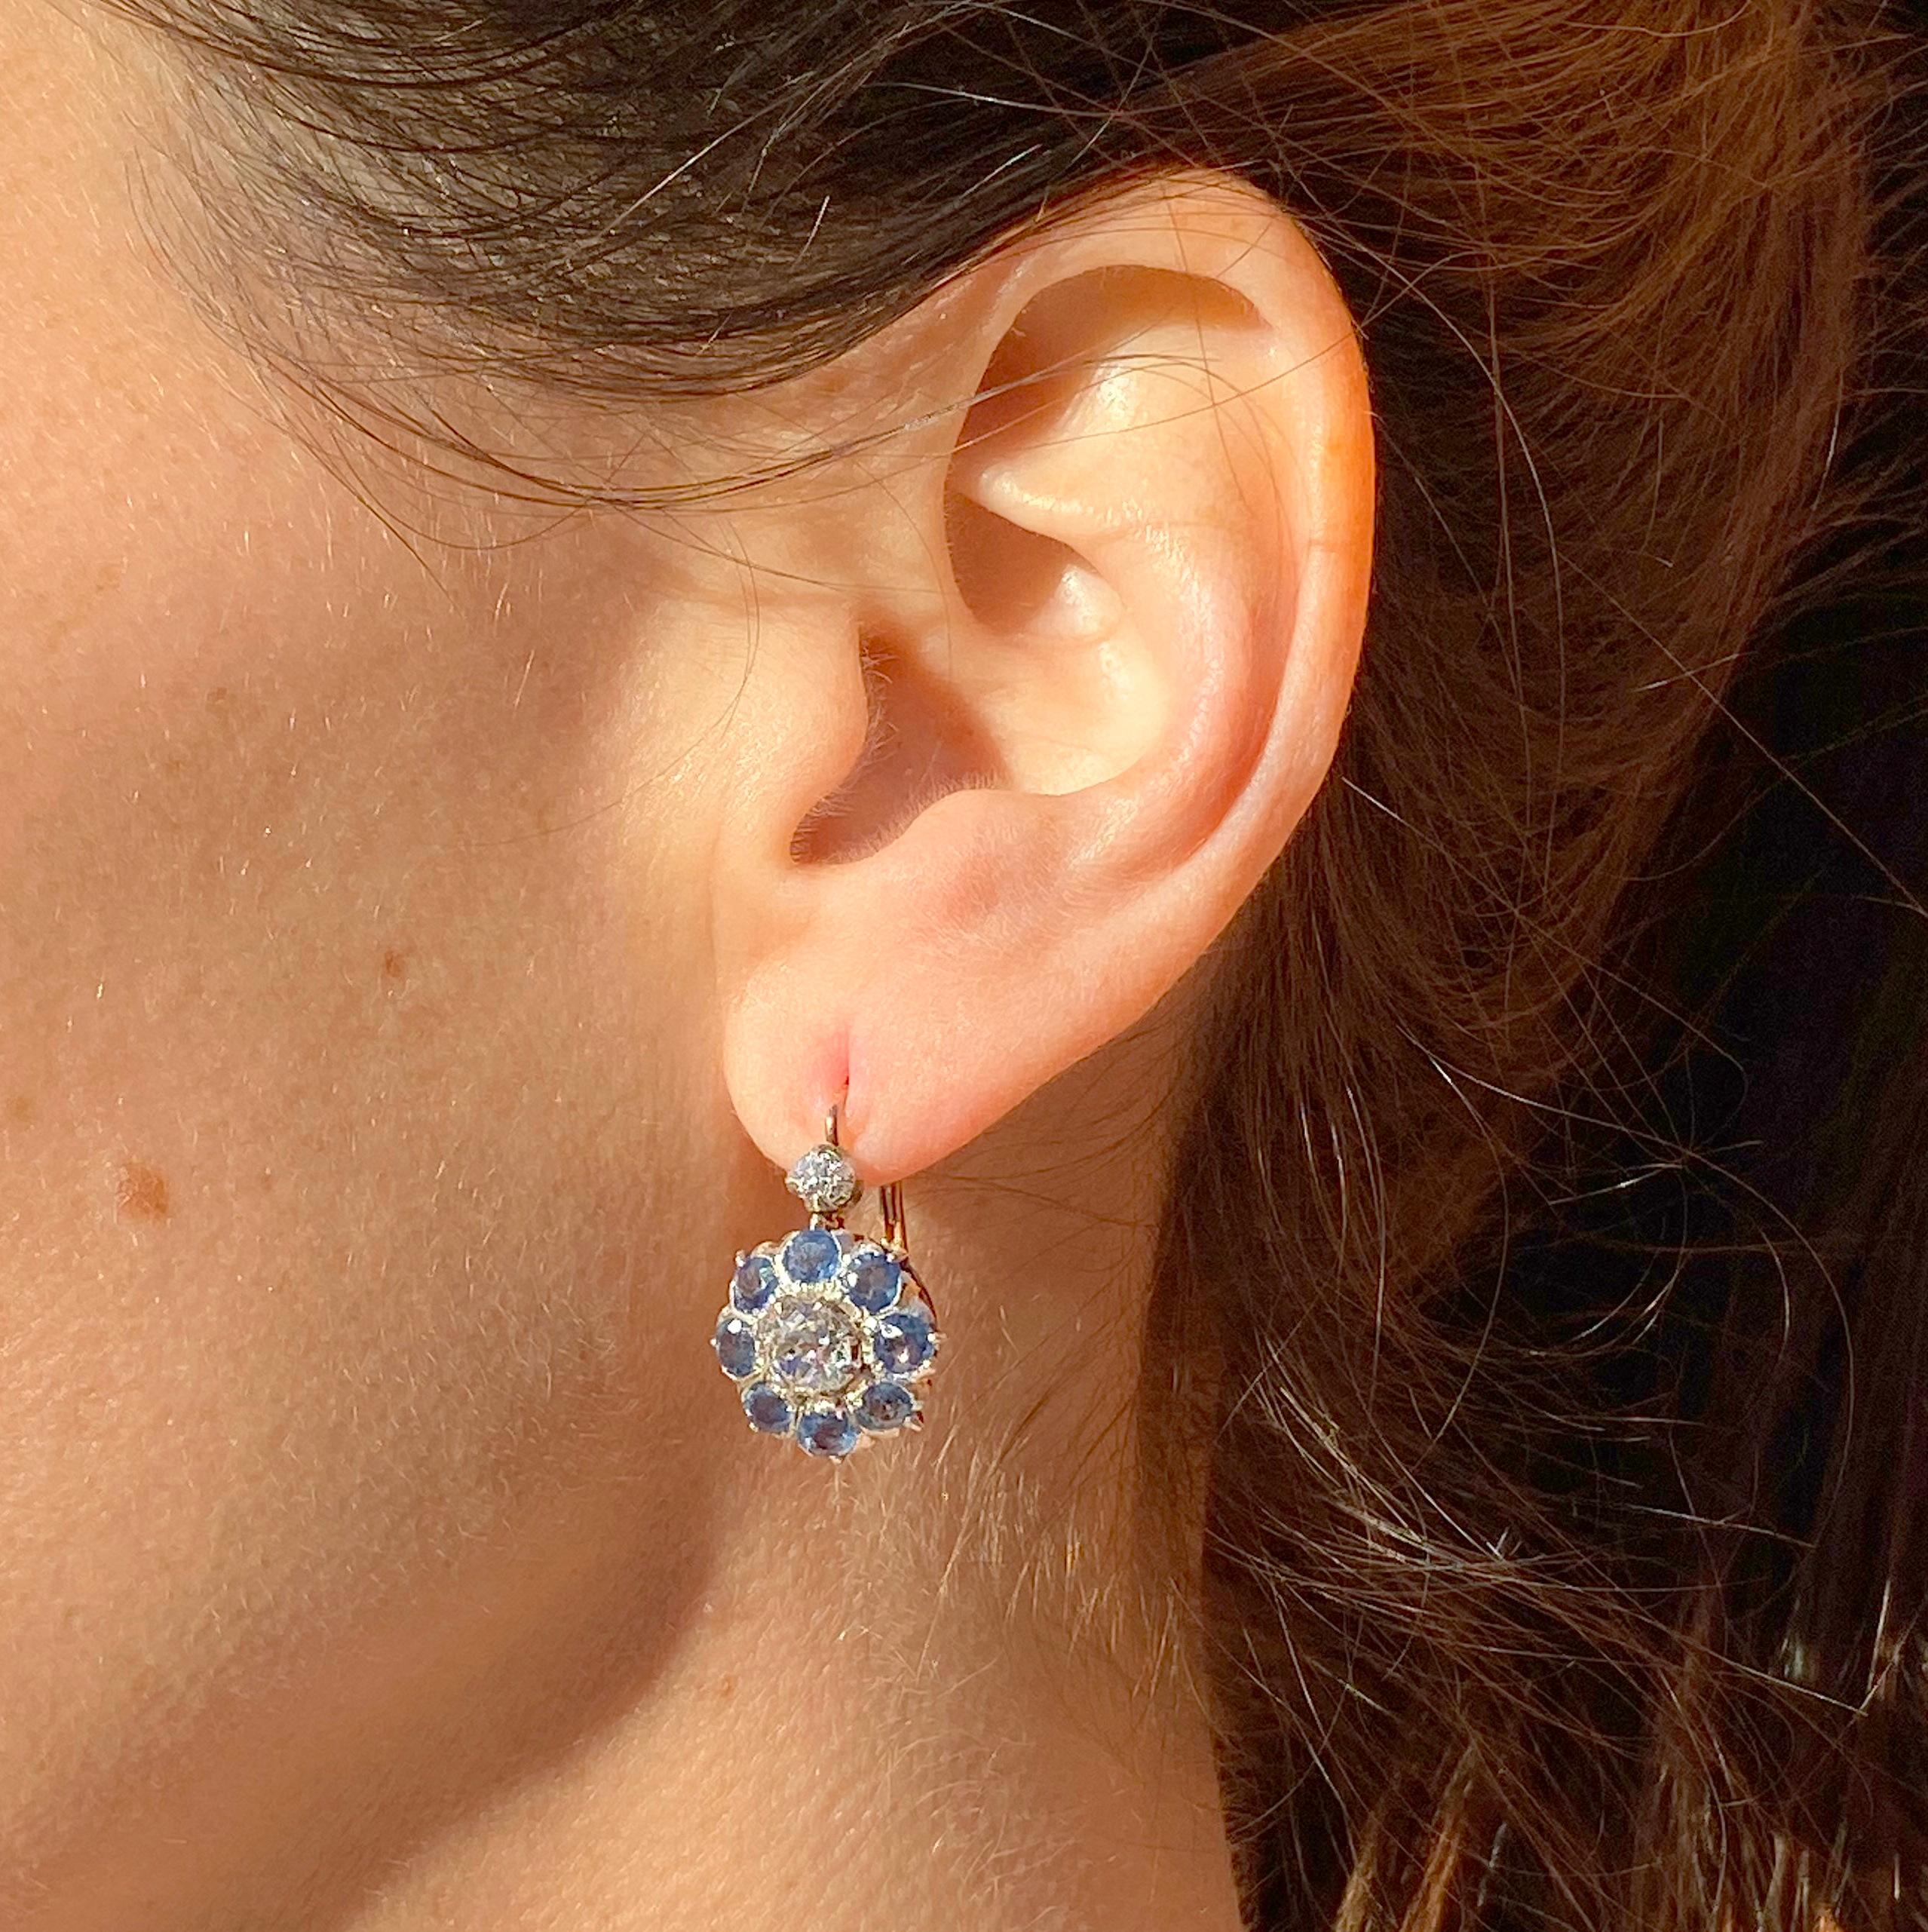 A sensational pair of antique earrings. Each cluster is set with an (approx.) 0.65 carat old mine cut diamond at the centre, both extraordinarily white, bright and lively. Eight cornflower blue natural sapphires surround the centre stone in a fine,